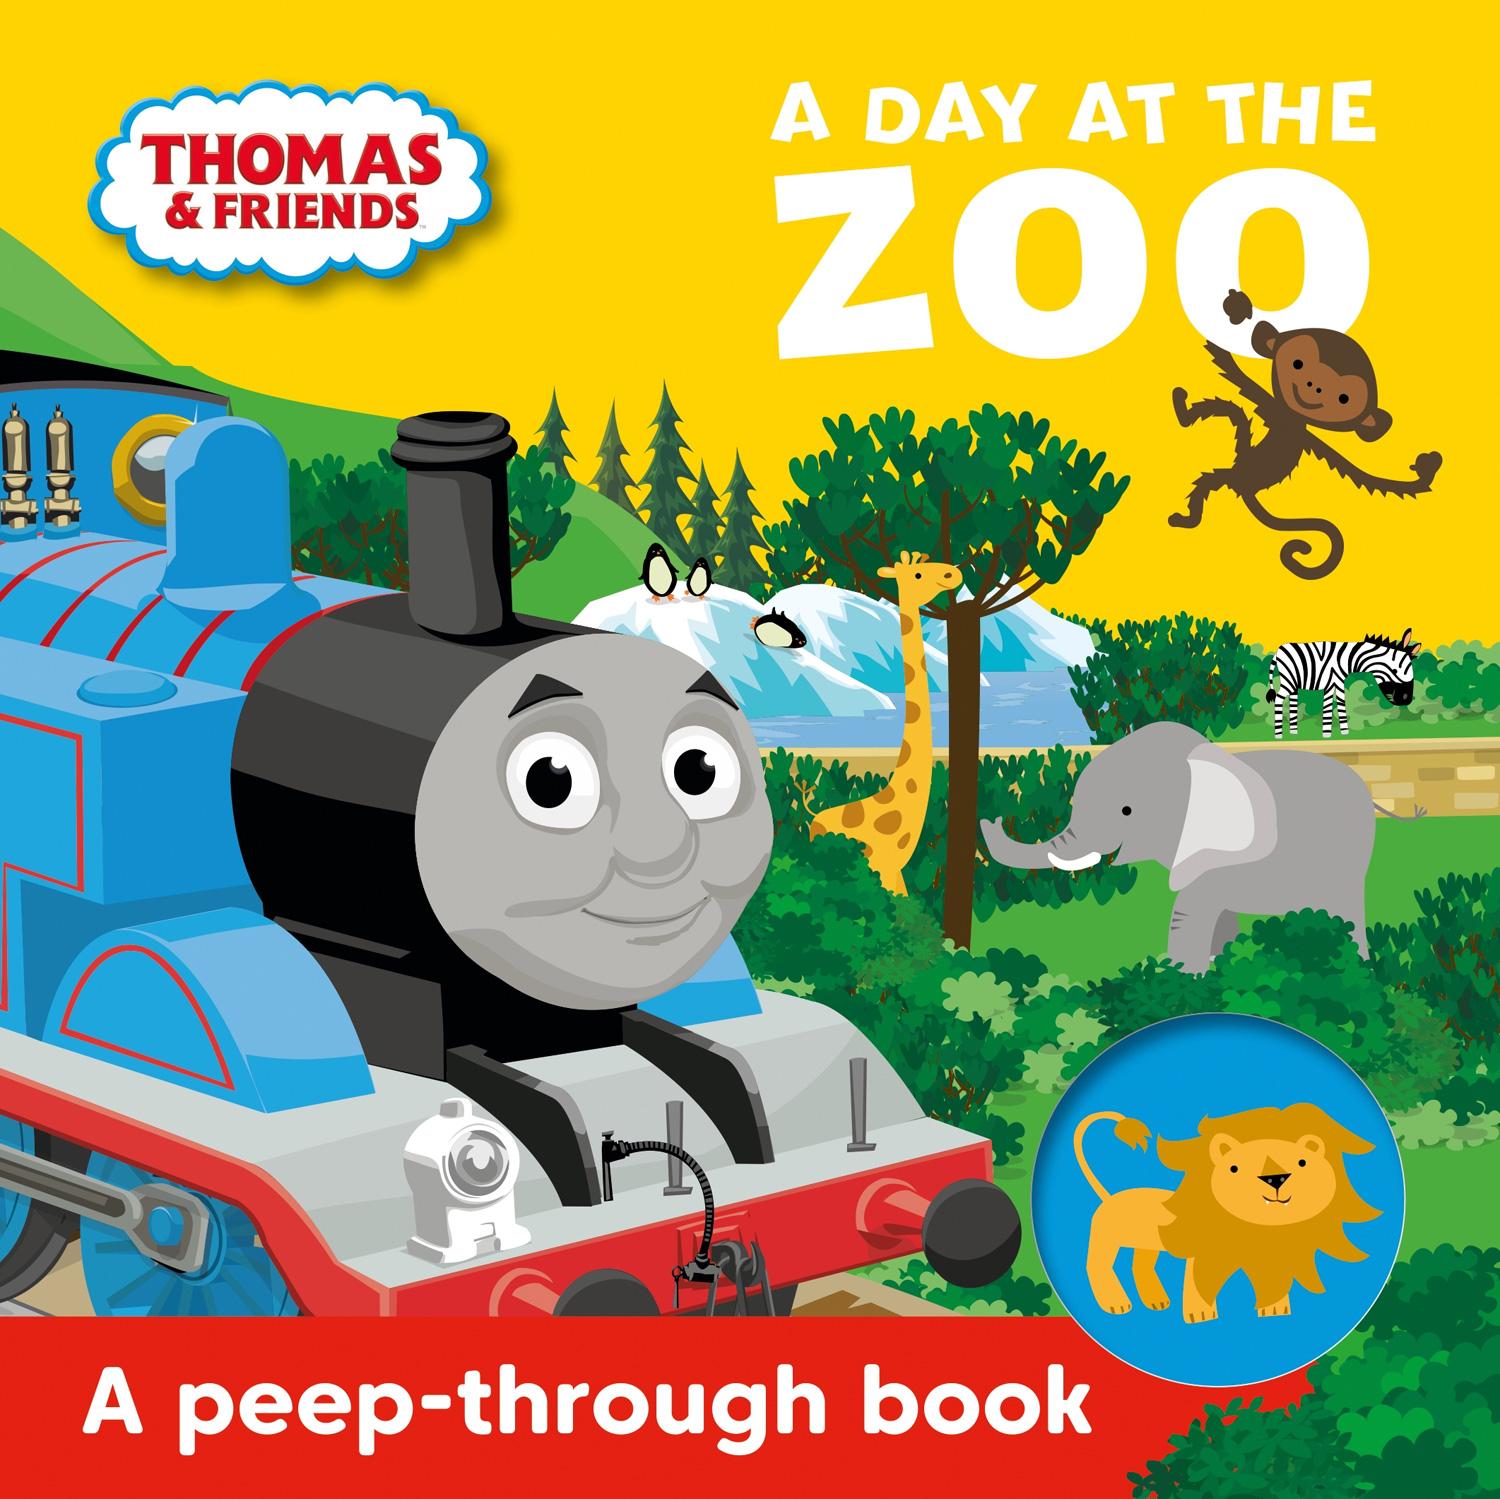 Kniha Thomas & Friends: A Day at the Zoo a peep-through book Egmont Publishing UK